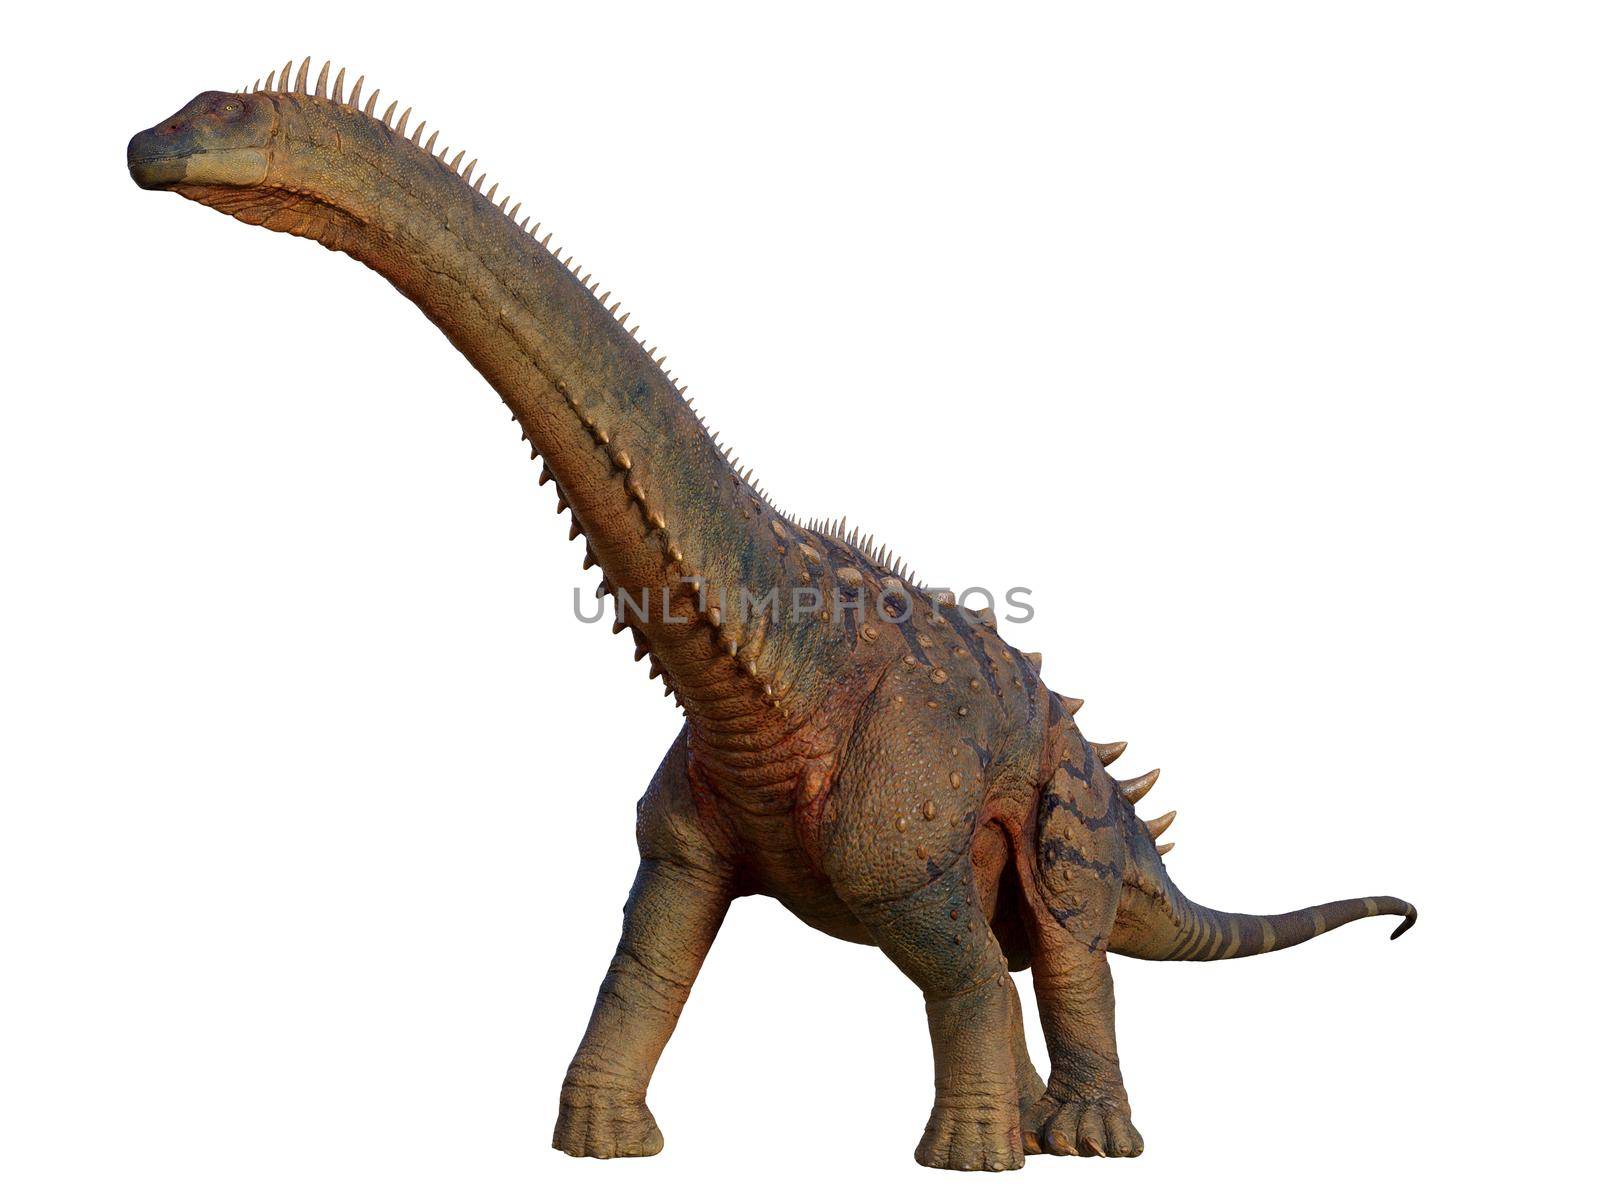 Alamosaurus was a herbivorous Titanosaur sauropod that lived in North America during the Cretaceous Period.